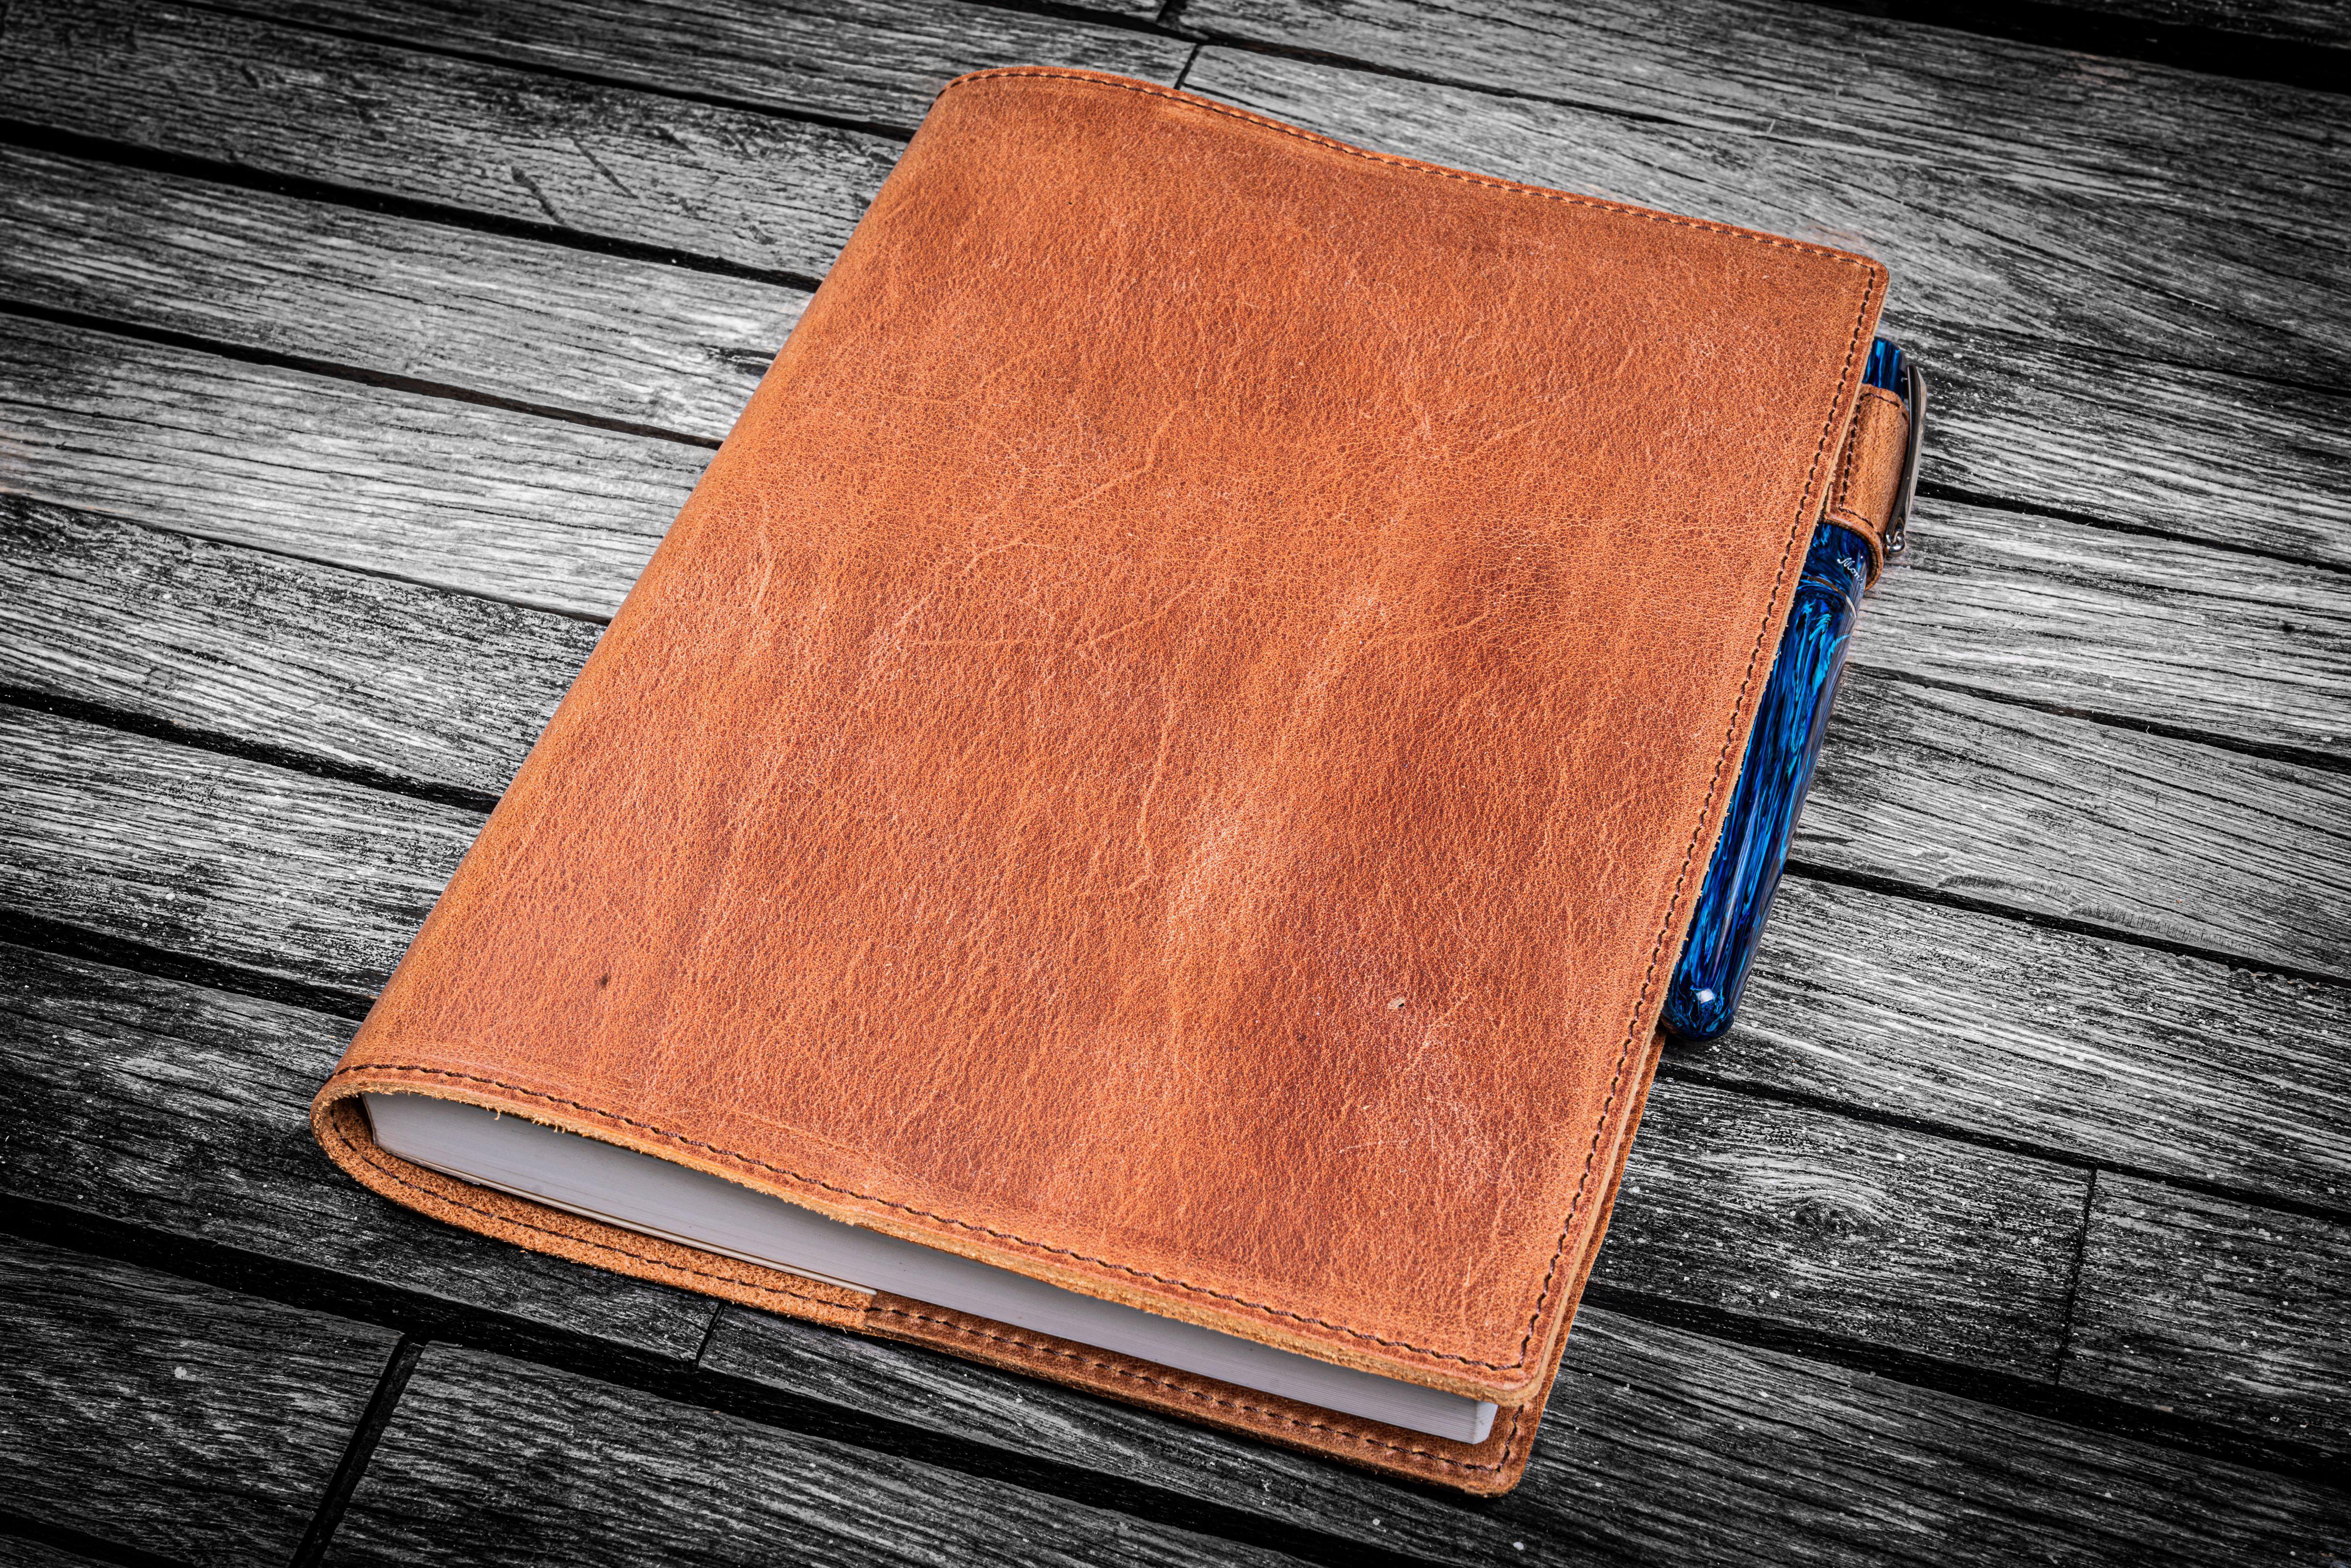 Moterm Leather Cover for A5 Notebooks - Fits Hobonichi Cousin, Stalogy and  Midori MD Planners, with Pen Loop, Card Slots and Back Pocket